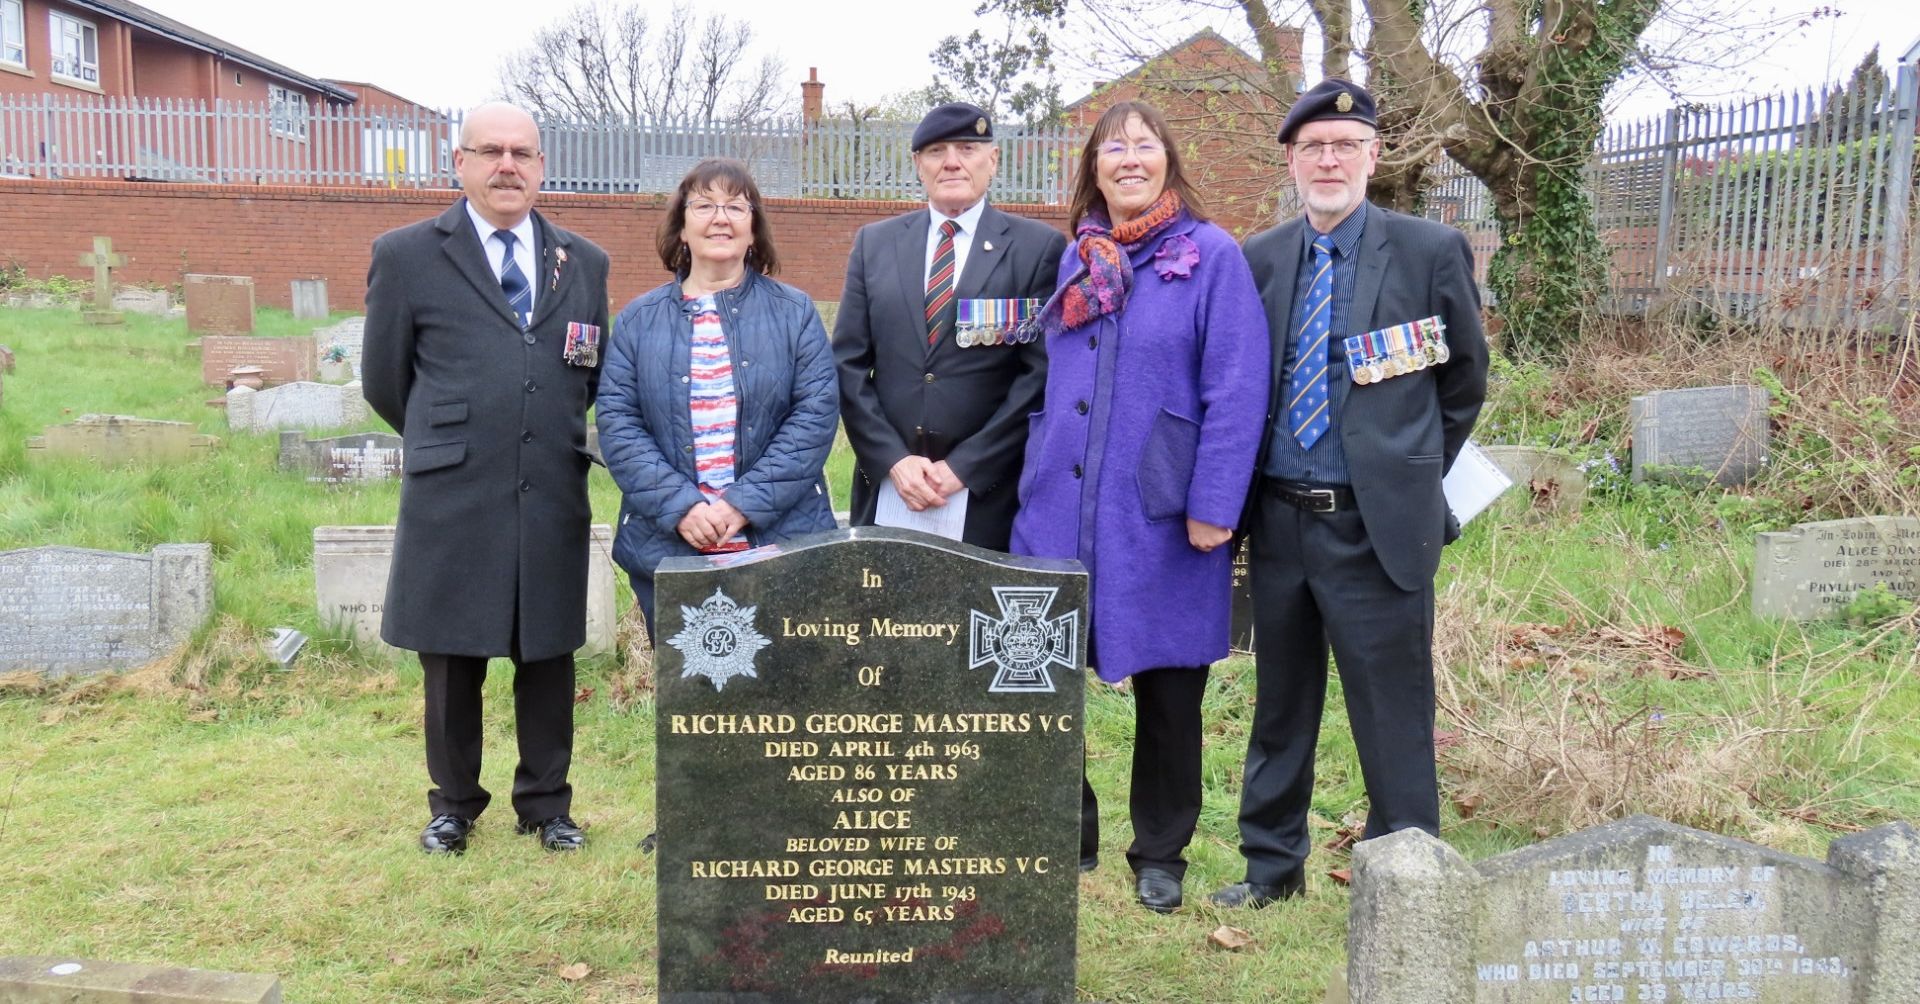 Crowds paid their respects as a new headstone was unveiled in tribute to Private Richard George Masters, from Southport, who was awarded a Victoria Cross when he saved the lives of 200 wounded British Army soldiers on 9th April 1918 during World War One. Fom left: Tony Ravera; Joanne Rich; Rolan Sutton; Judy Masters; and Jon Price. 